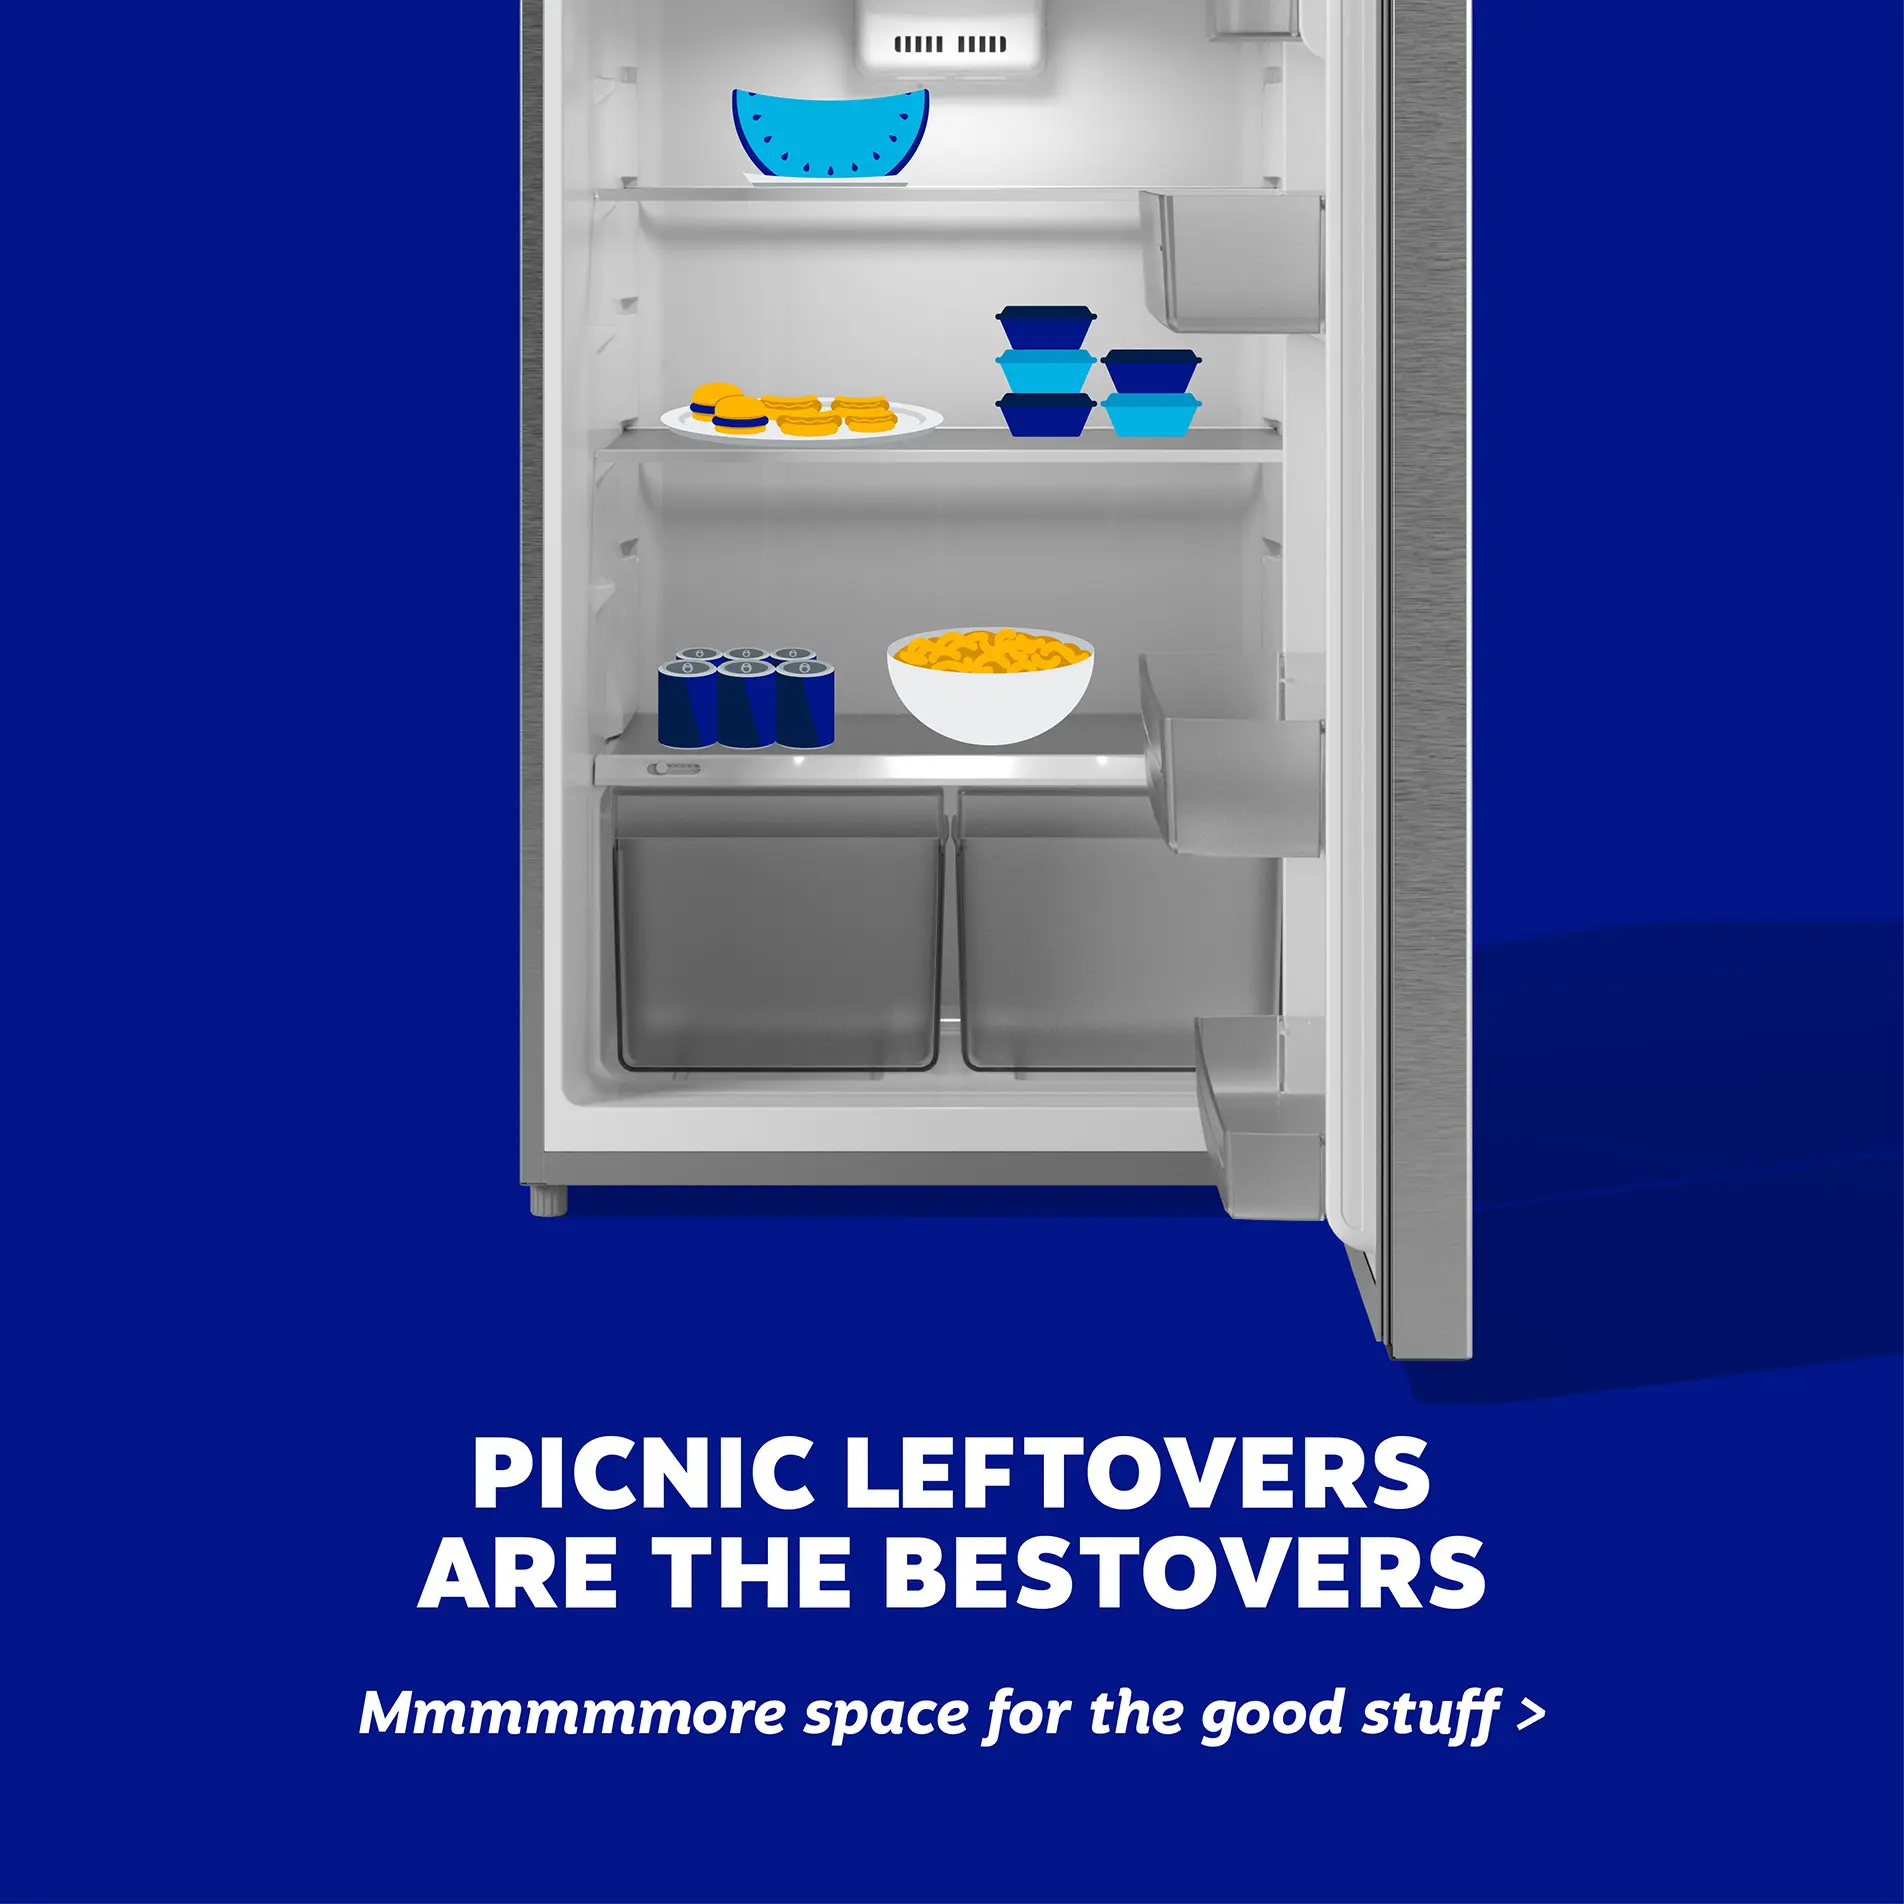 Element refrigerator: picnic leftovers are the bestovers - Mmmmmmmore space for the good stuff